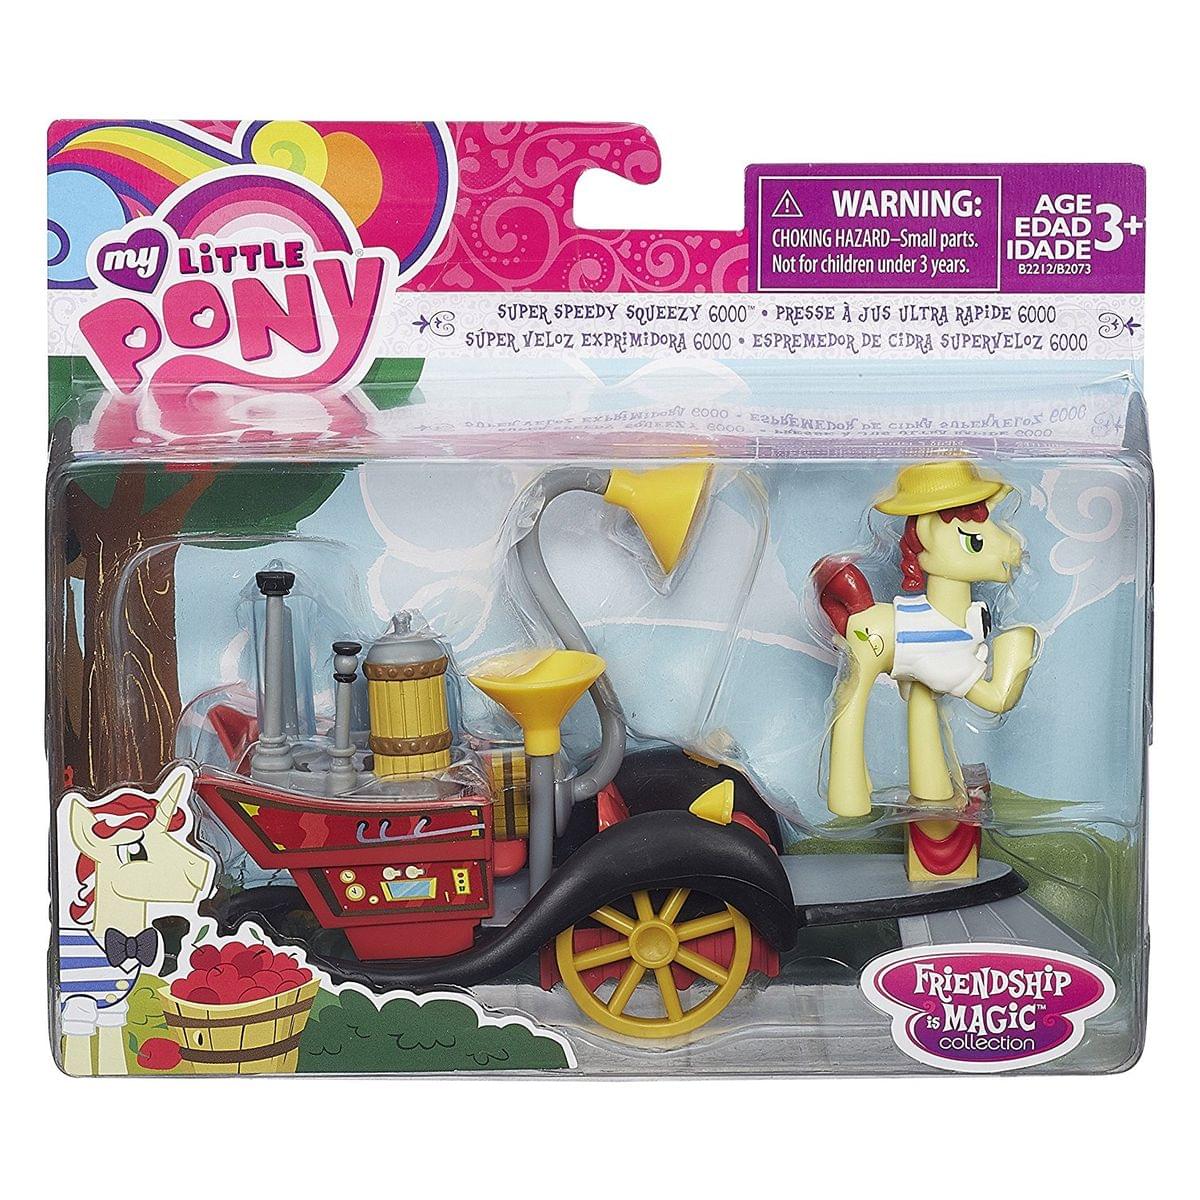 My Little Pony Friendship Is Magic Collection Super Speedy Squeezy 6000